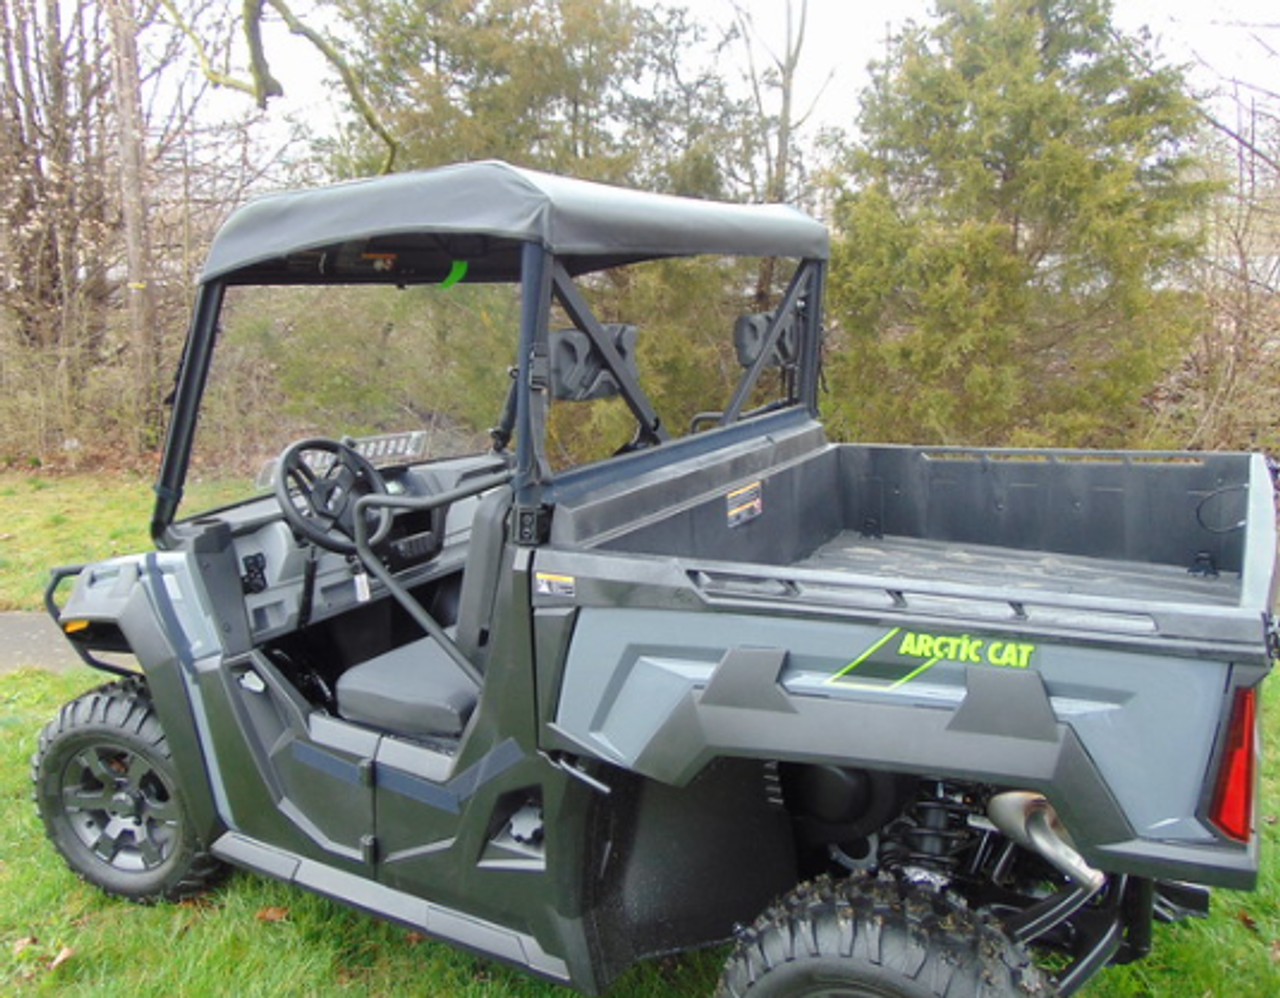 Arctic Cat Prowler Pro Soft Top for Hard Windshield